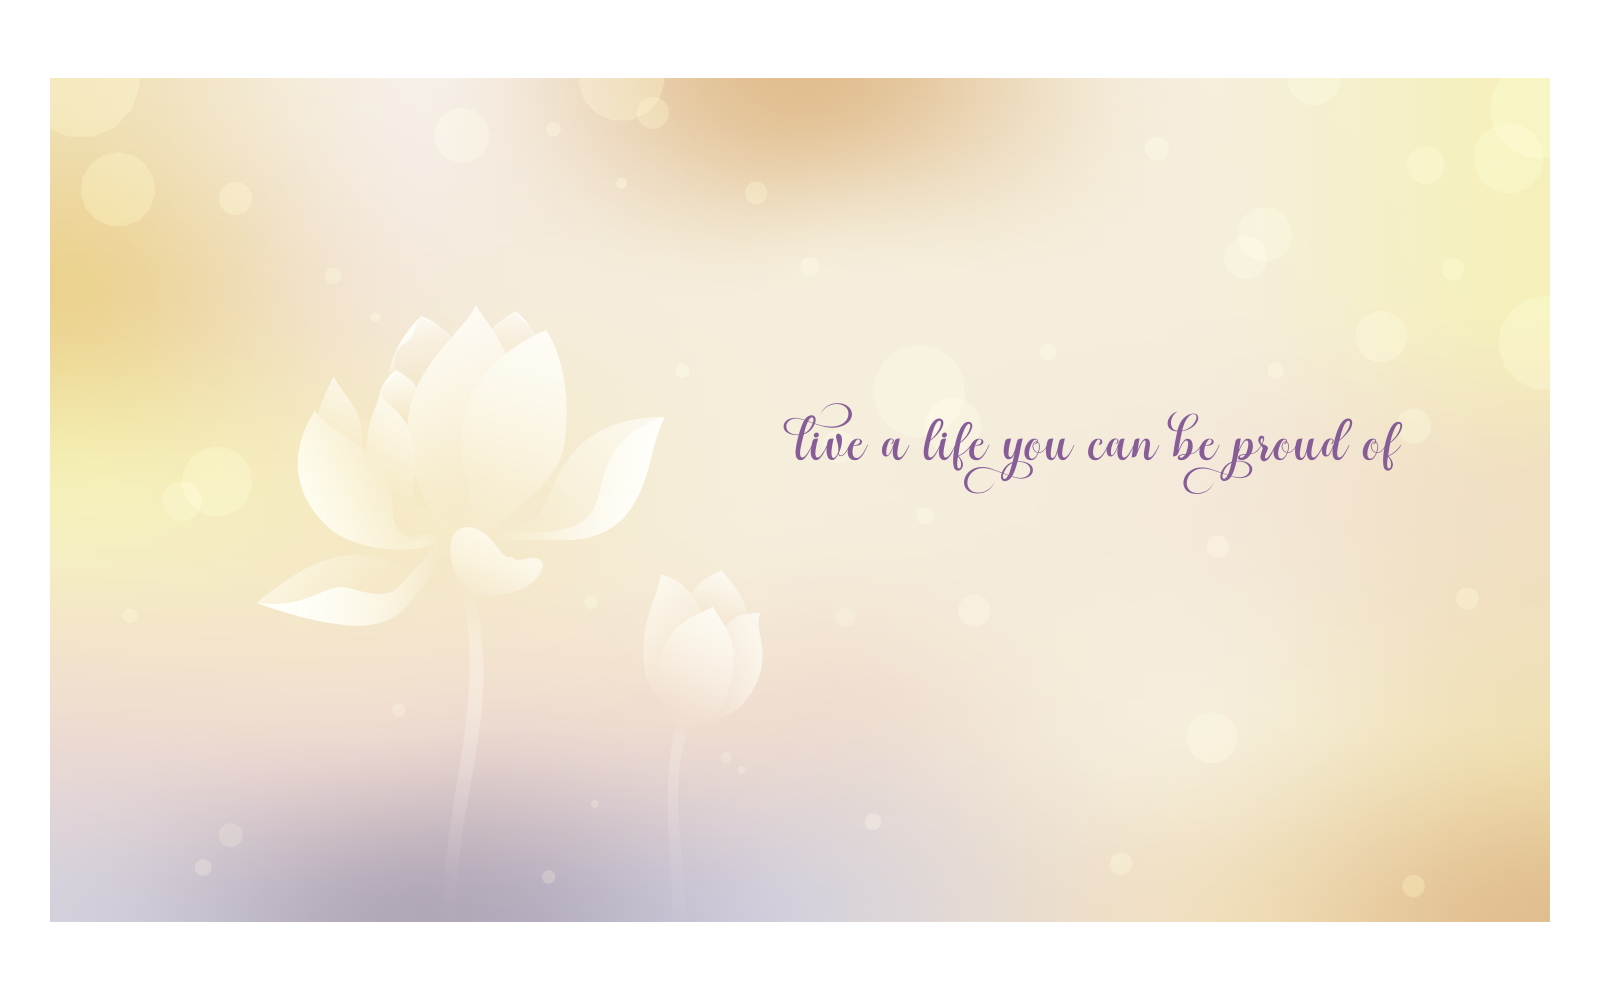 Inspirational Backgrounds 14400x8100px With Lotus And Message About Living A Proud Life